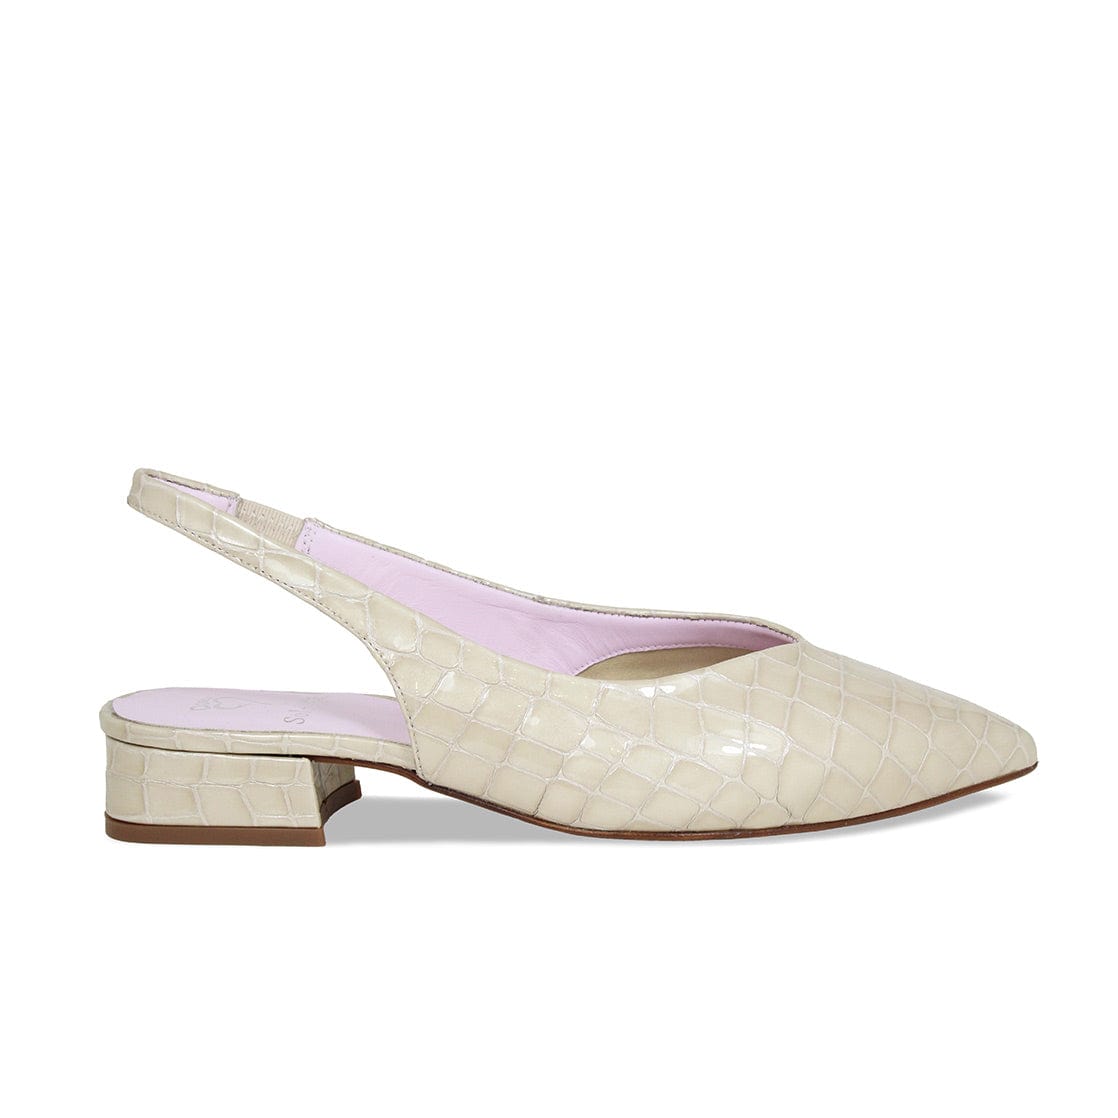 Sienna: Cream Croc - Patent Leather Flats for Bunions | Sole Bliss ...